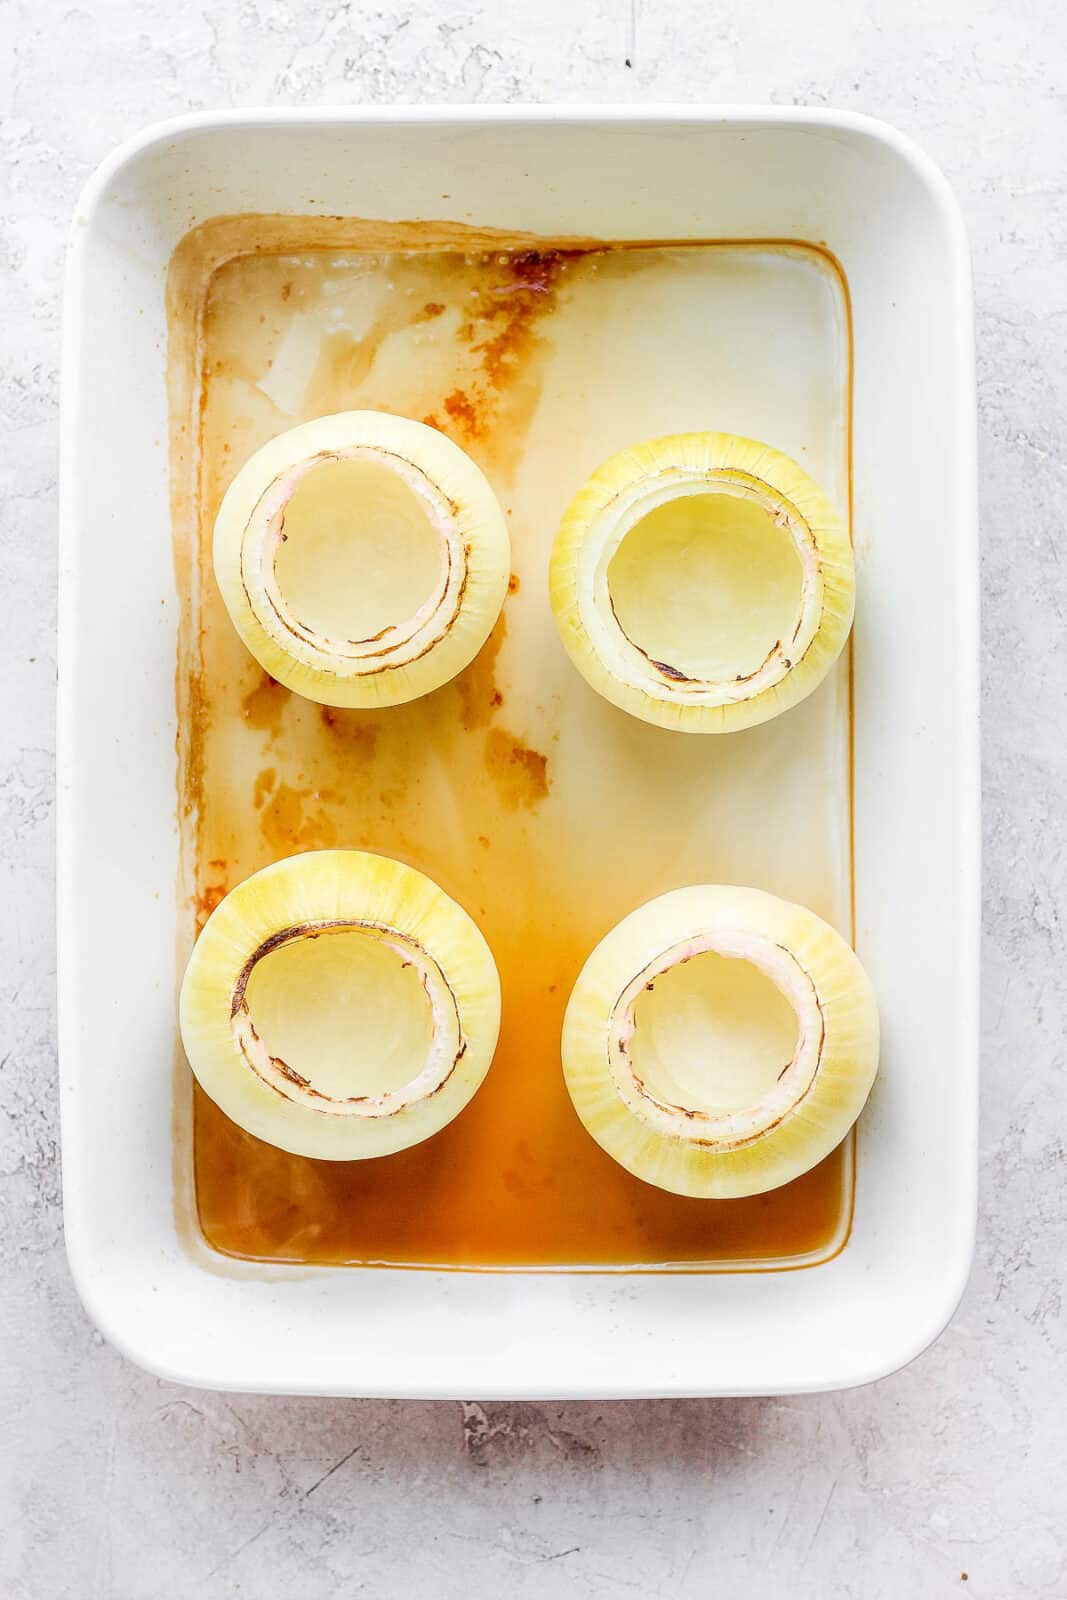 A baking pan with four baked, hollowed out onions.